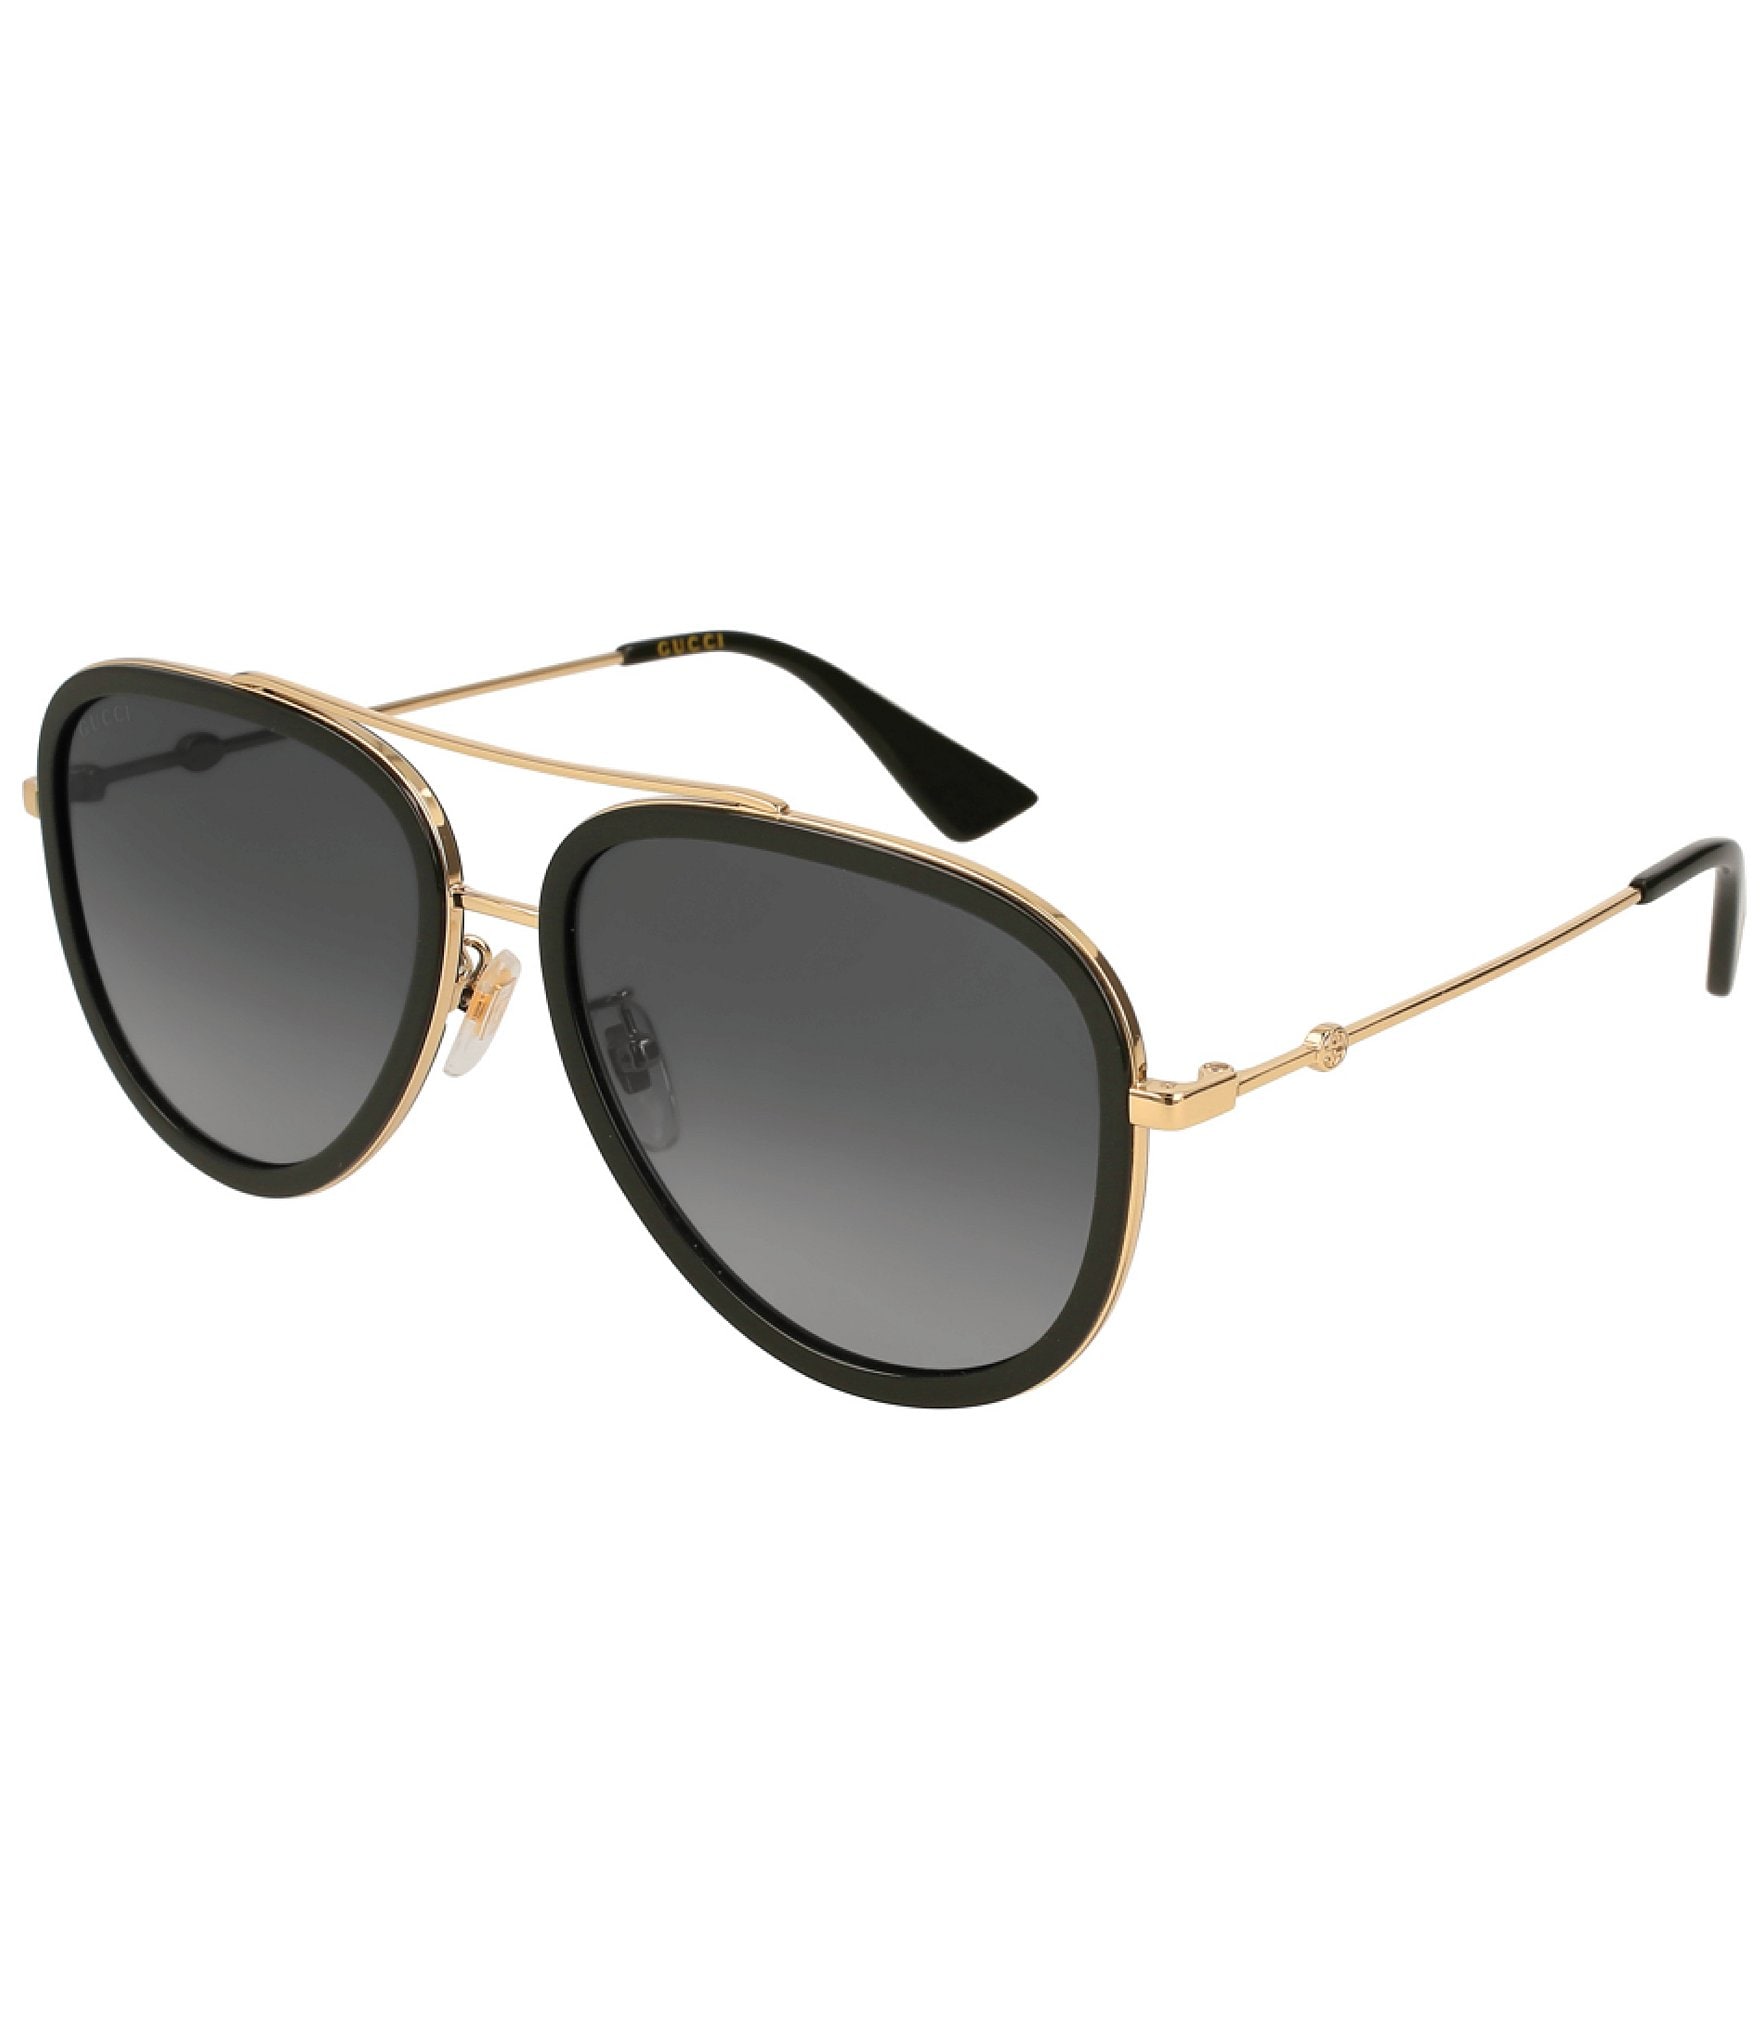 Aviator Sunglasses: A Timeless Trend Revisited | Yesglasses